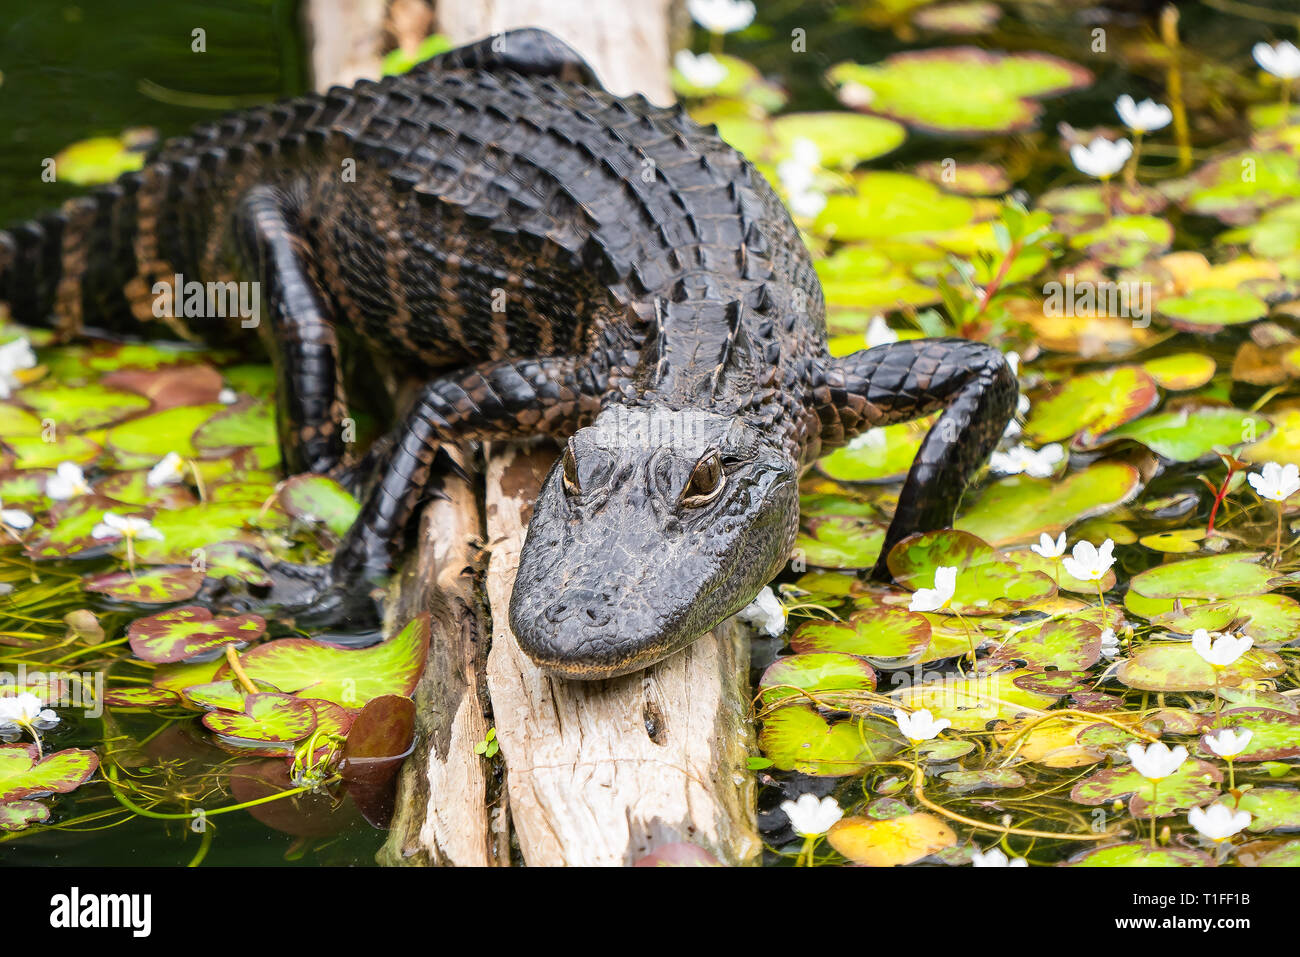 Mid sized American Alligator resting on log in lily pond in the Everglades National Park in Florida with flowers and lily pads showing gator details Stock Photo